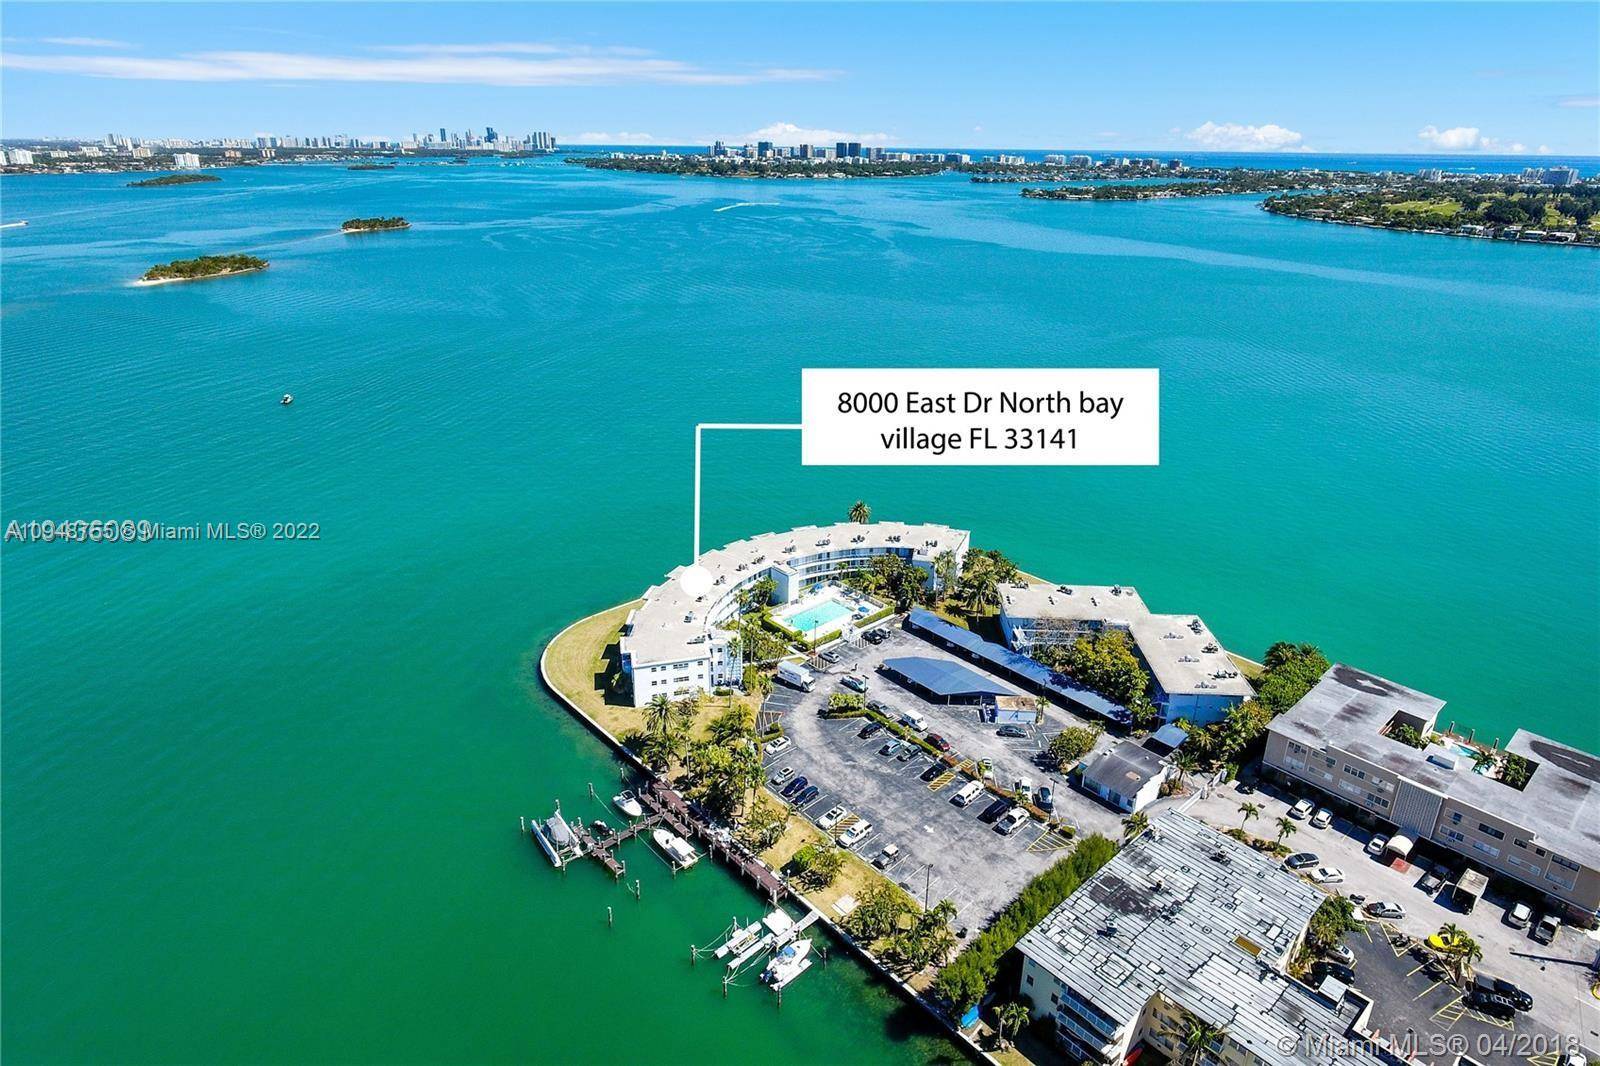 Biscayne Sea Club Redevelopment Site is Compromised of three parcels totaling approximately 3 acres located on the northeast end of Harbor Island in North Bay Village, Florida.